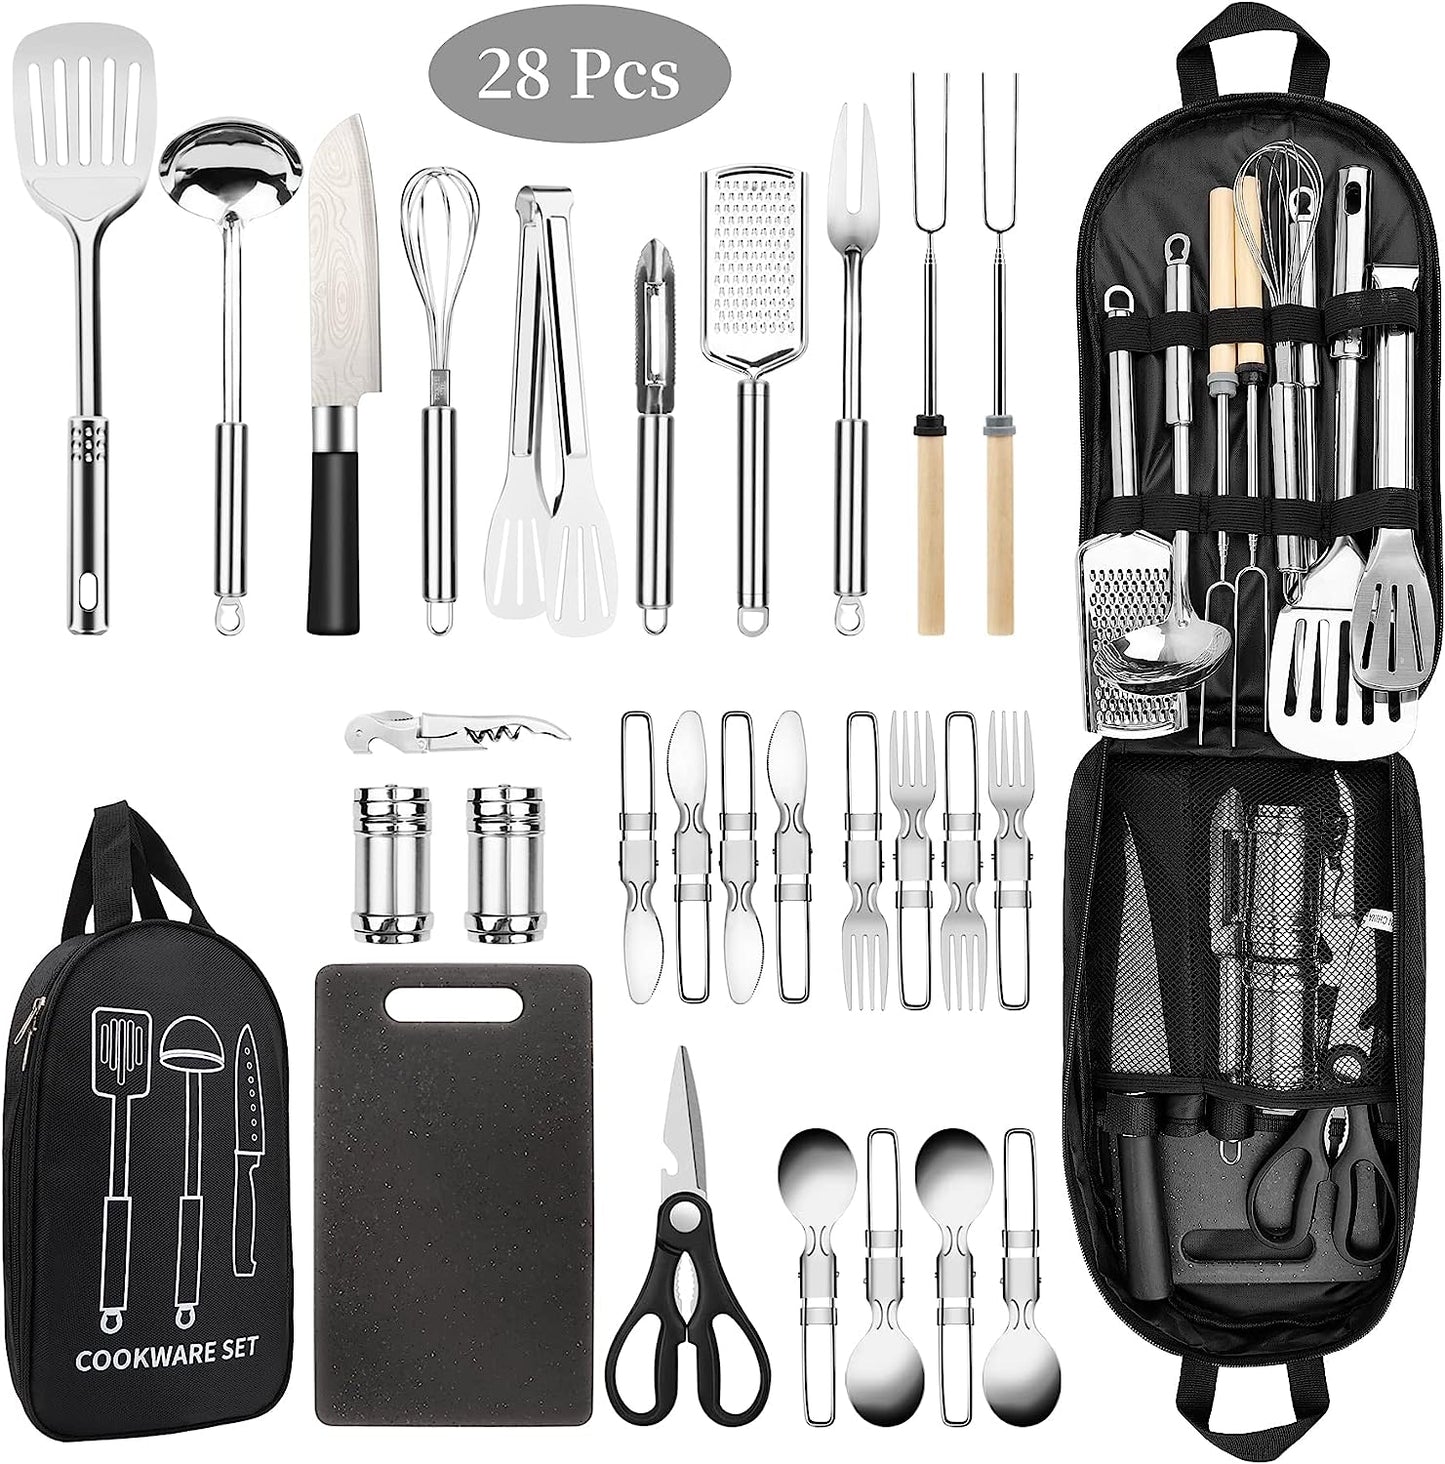 Camping Cooking Utensils Set, Stainless Steel Grill Tools, Camping BBQ Cookware Gear and Equipment for Travel Tenting RV Van Picnic Portable Kitchen Essentials Accessories(USA)